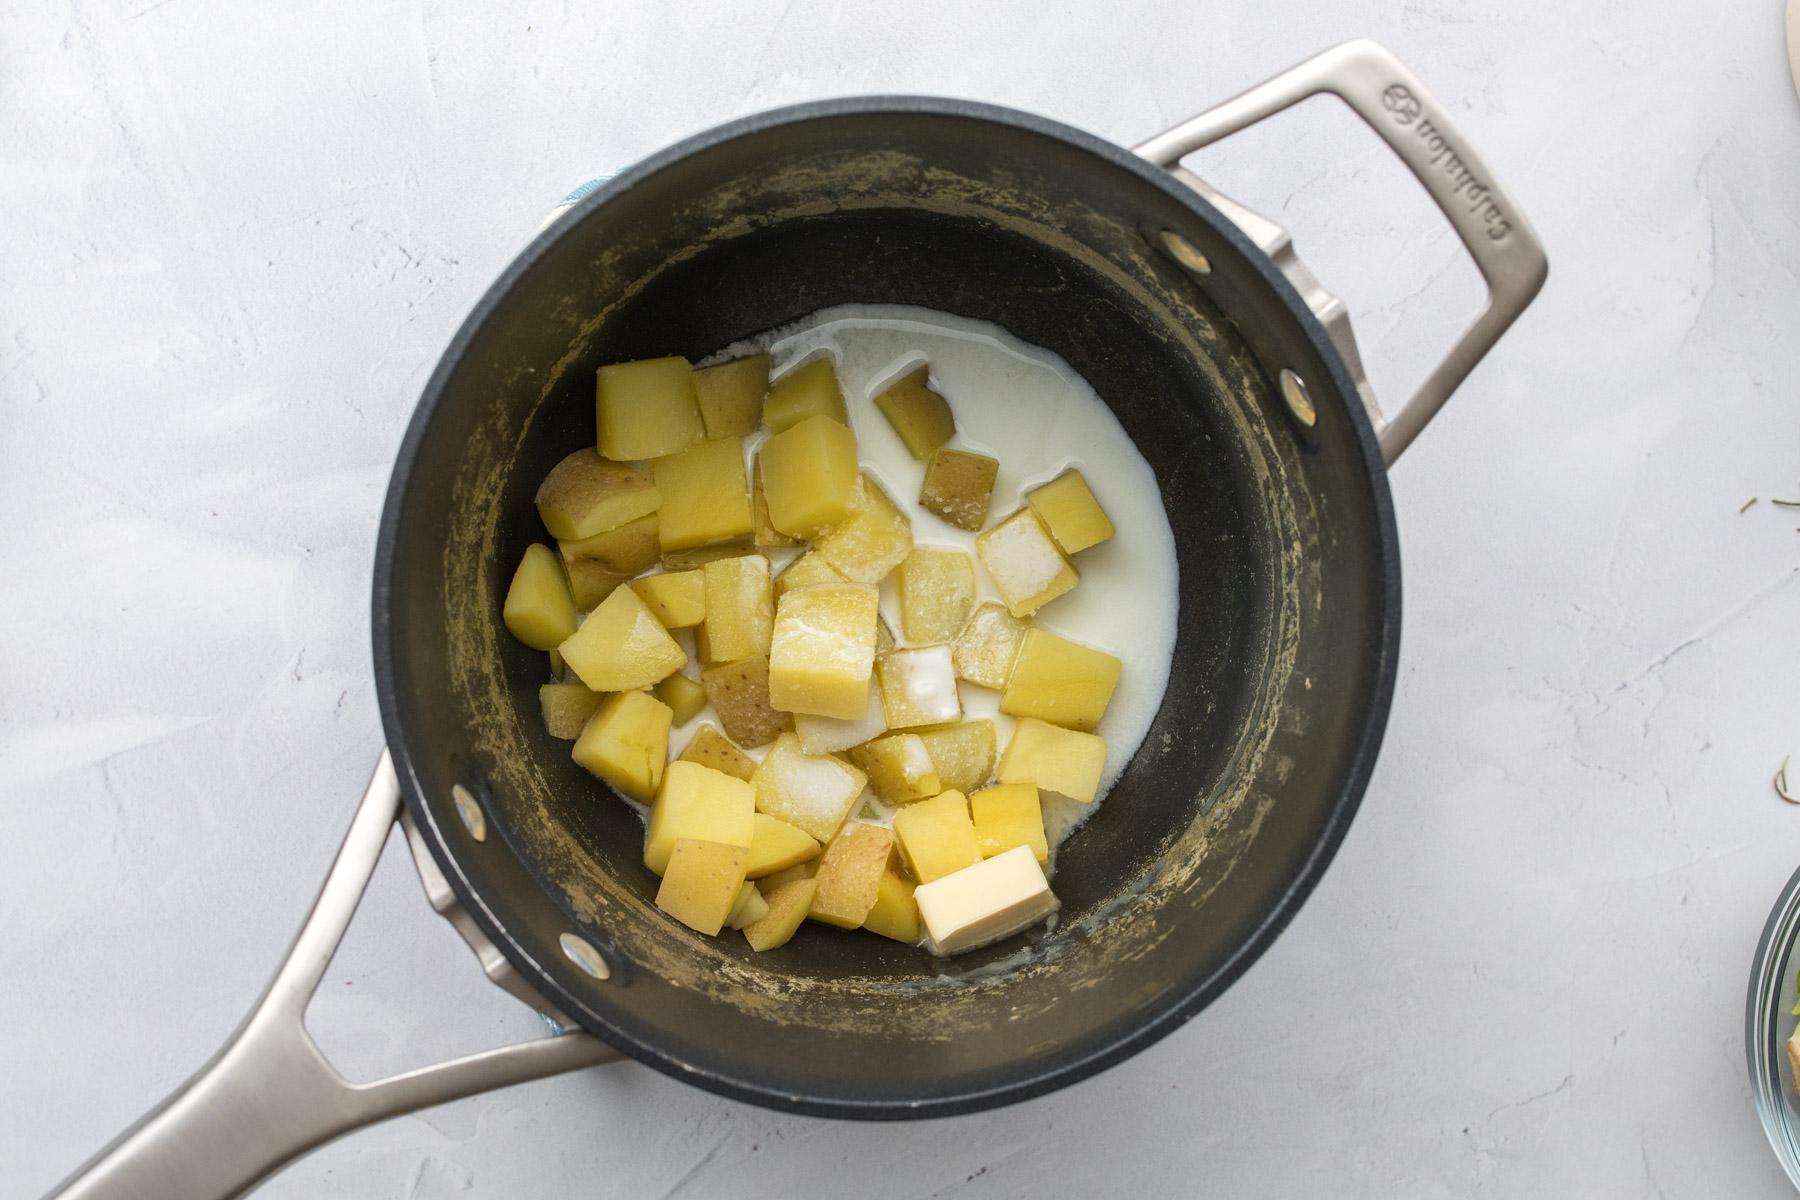 cubed potatoes and milk in a pot